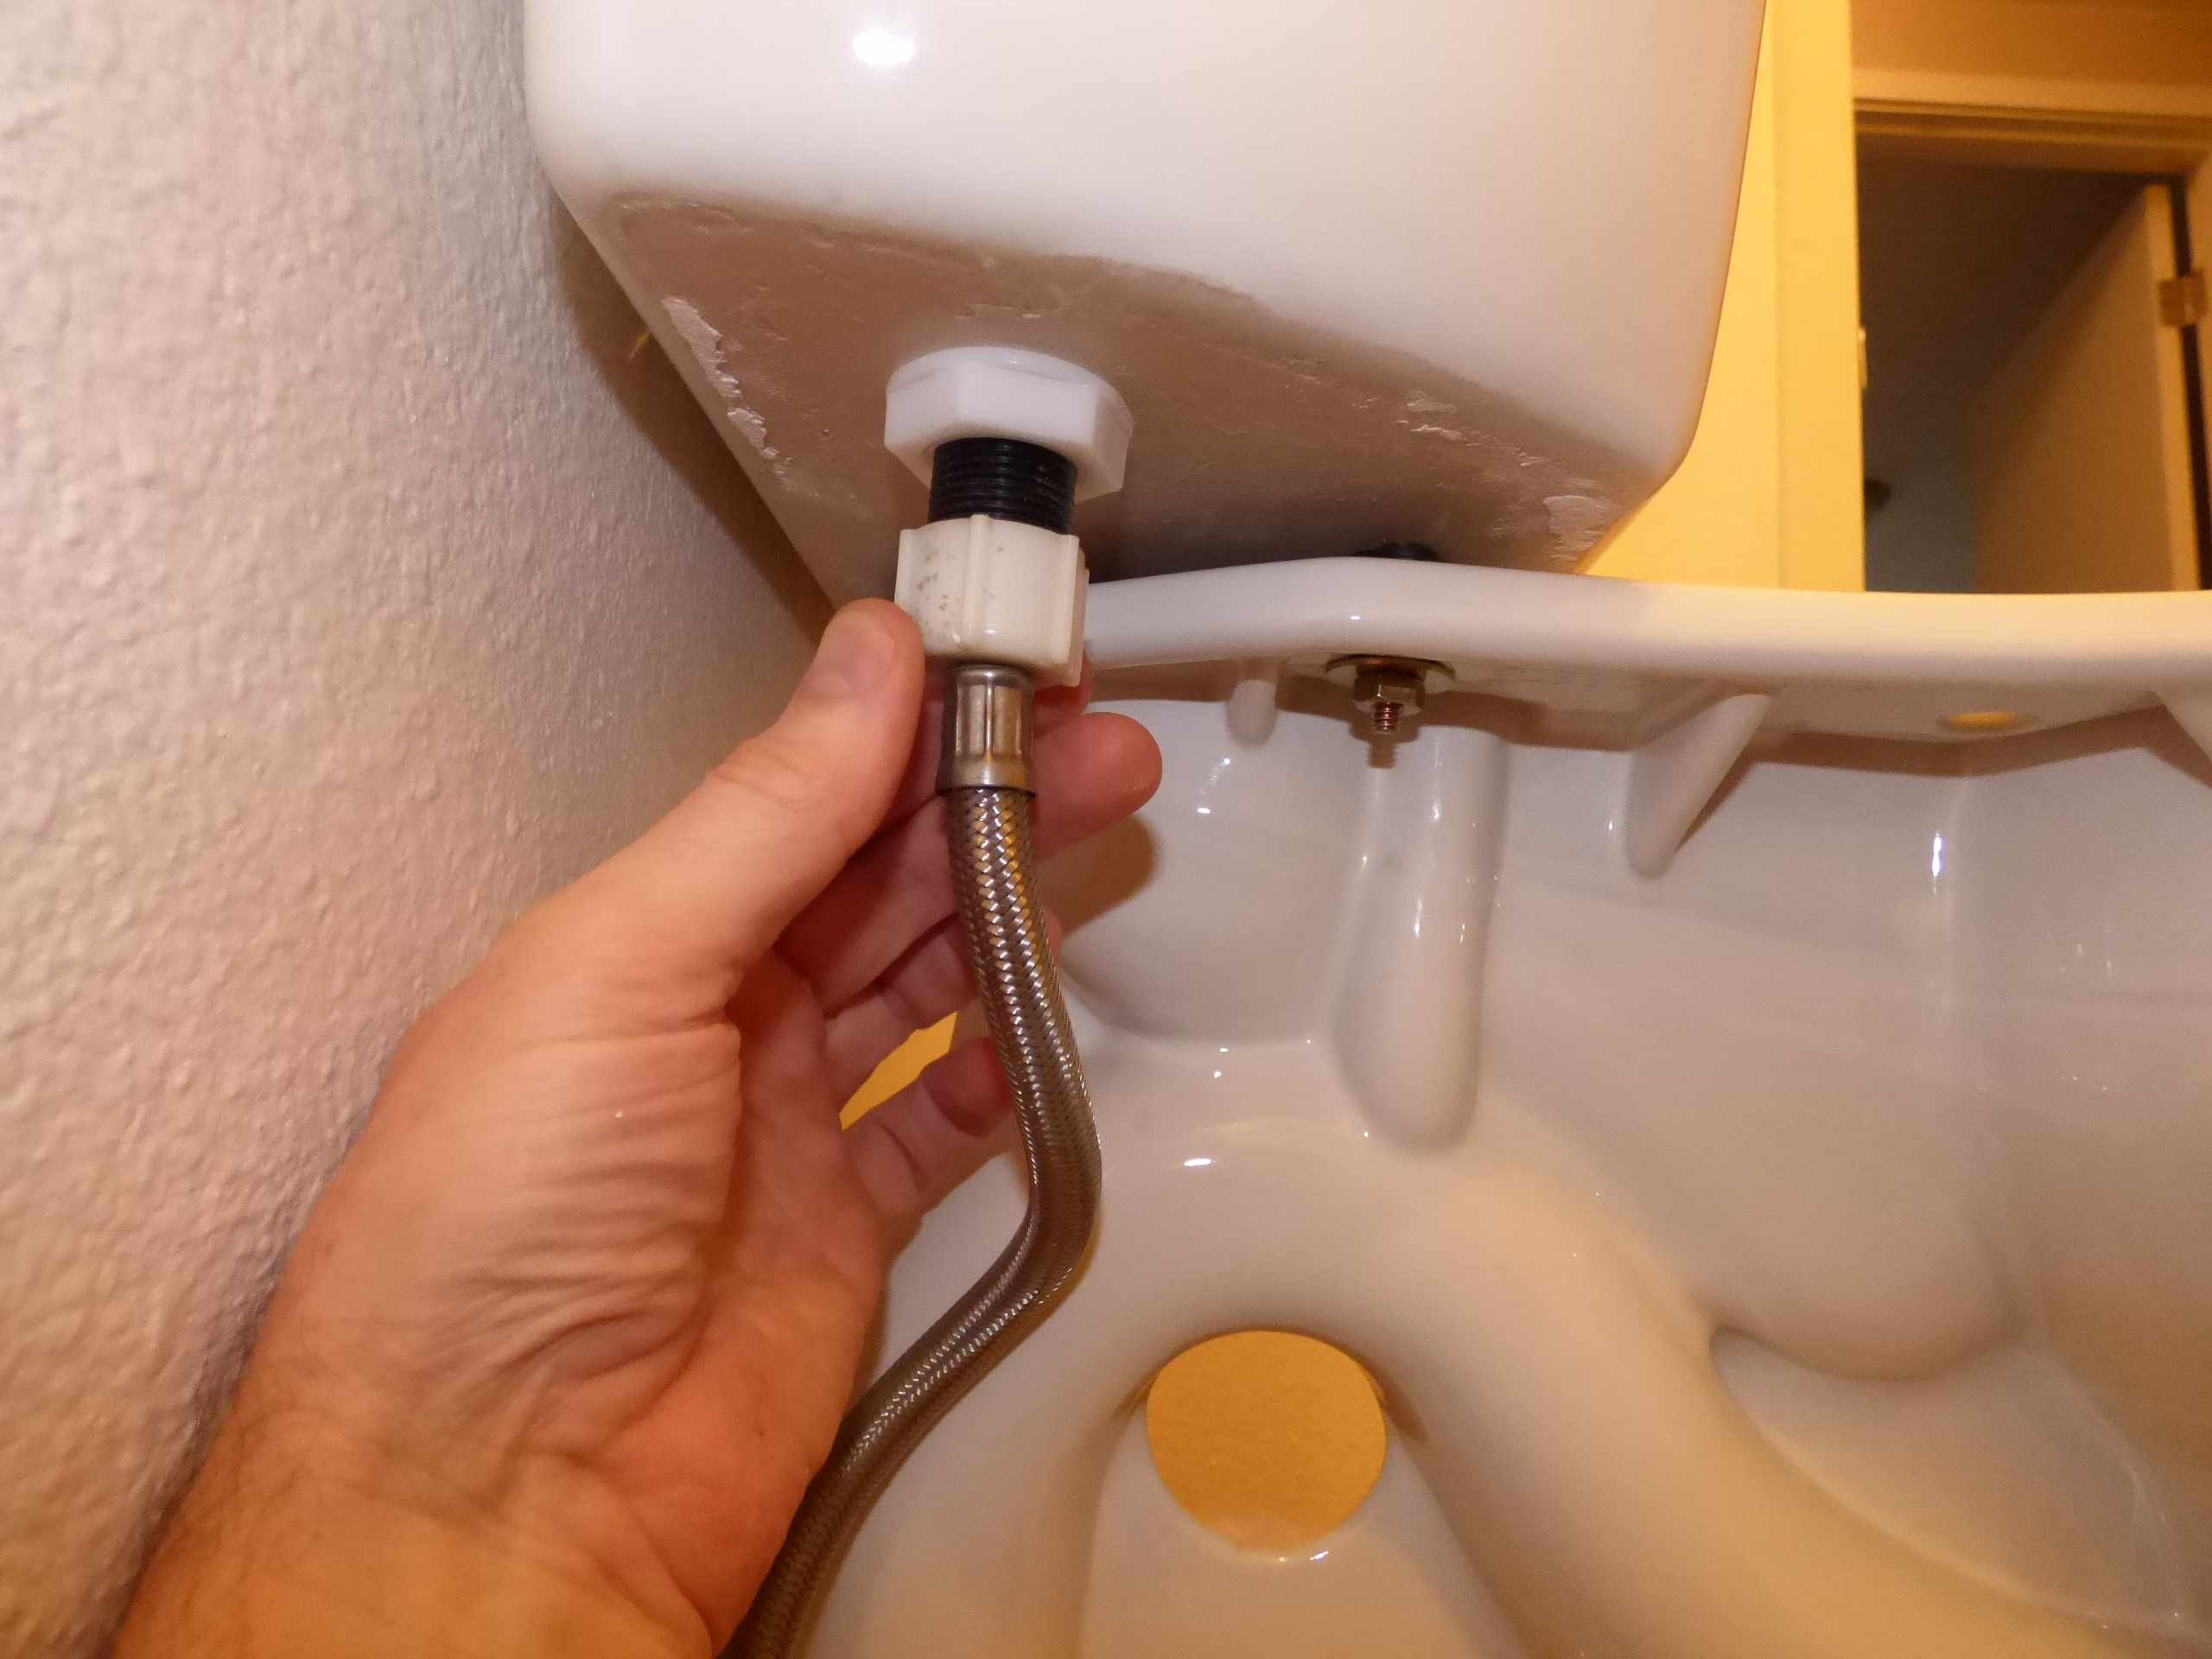 Making This Mass Market Toilet a Little Easier To Install